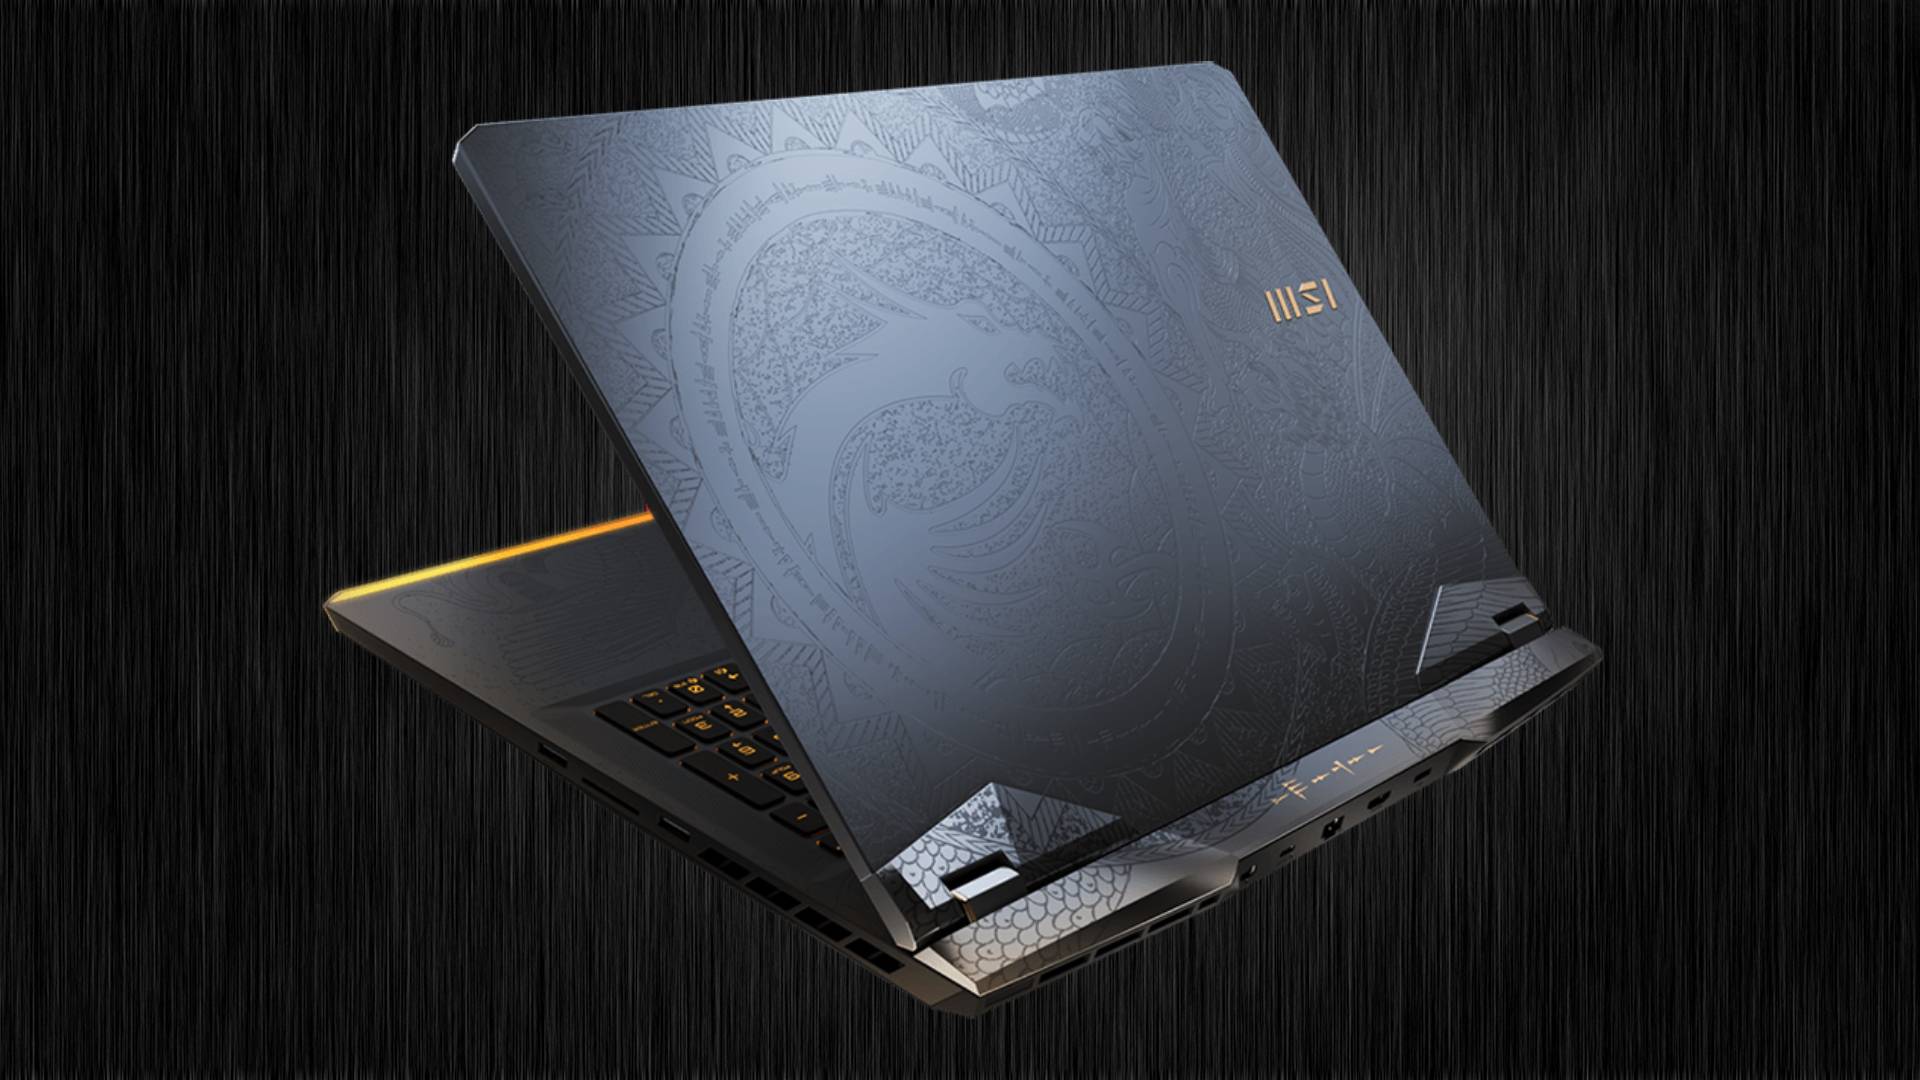 MSI's Nvidia RTX 3070 Ti and RTX 3080 Ti gaming laptop lineup has leaked online